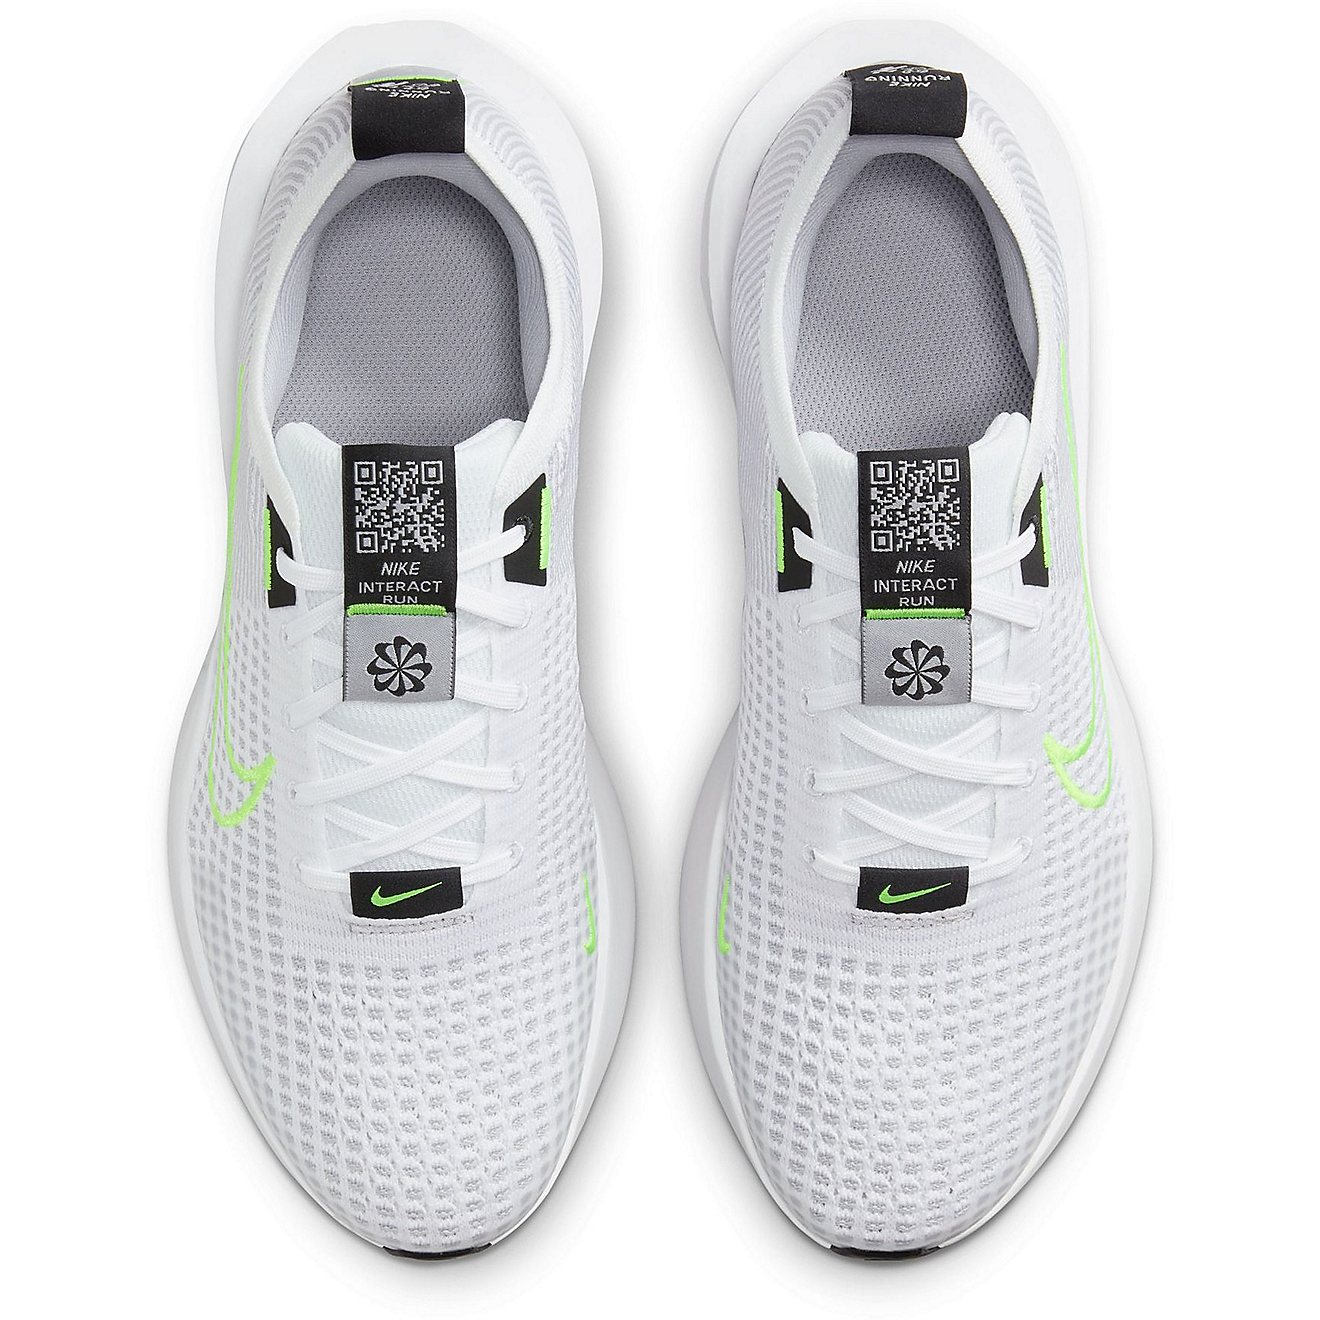 Nike Men's Interact Running Shoes | Free Shipping at Academy